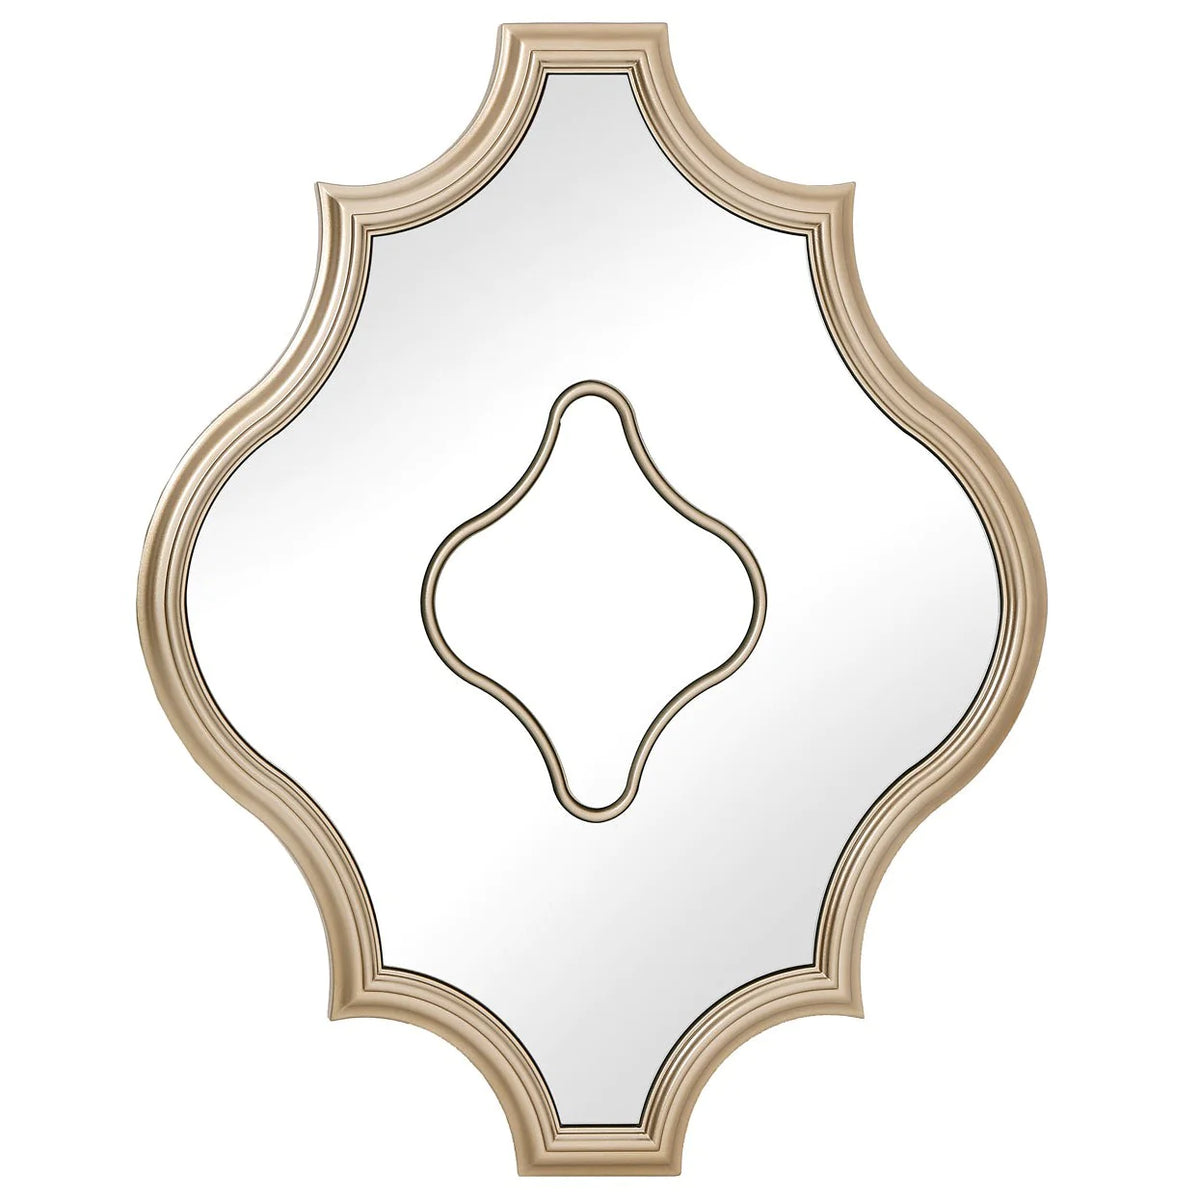 Racheal Ogee Shaped Mirror - Gold Finish